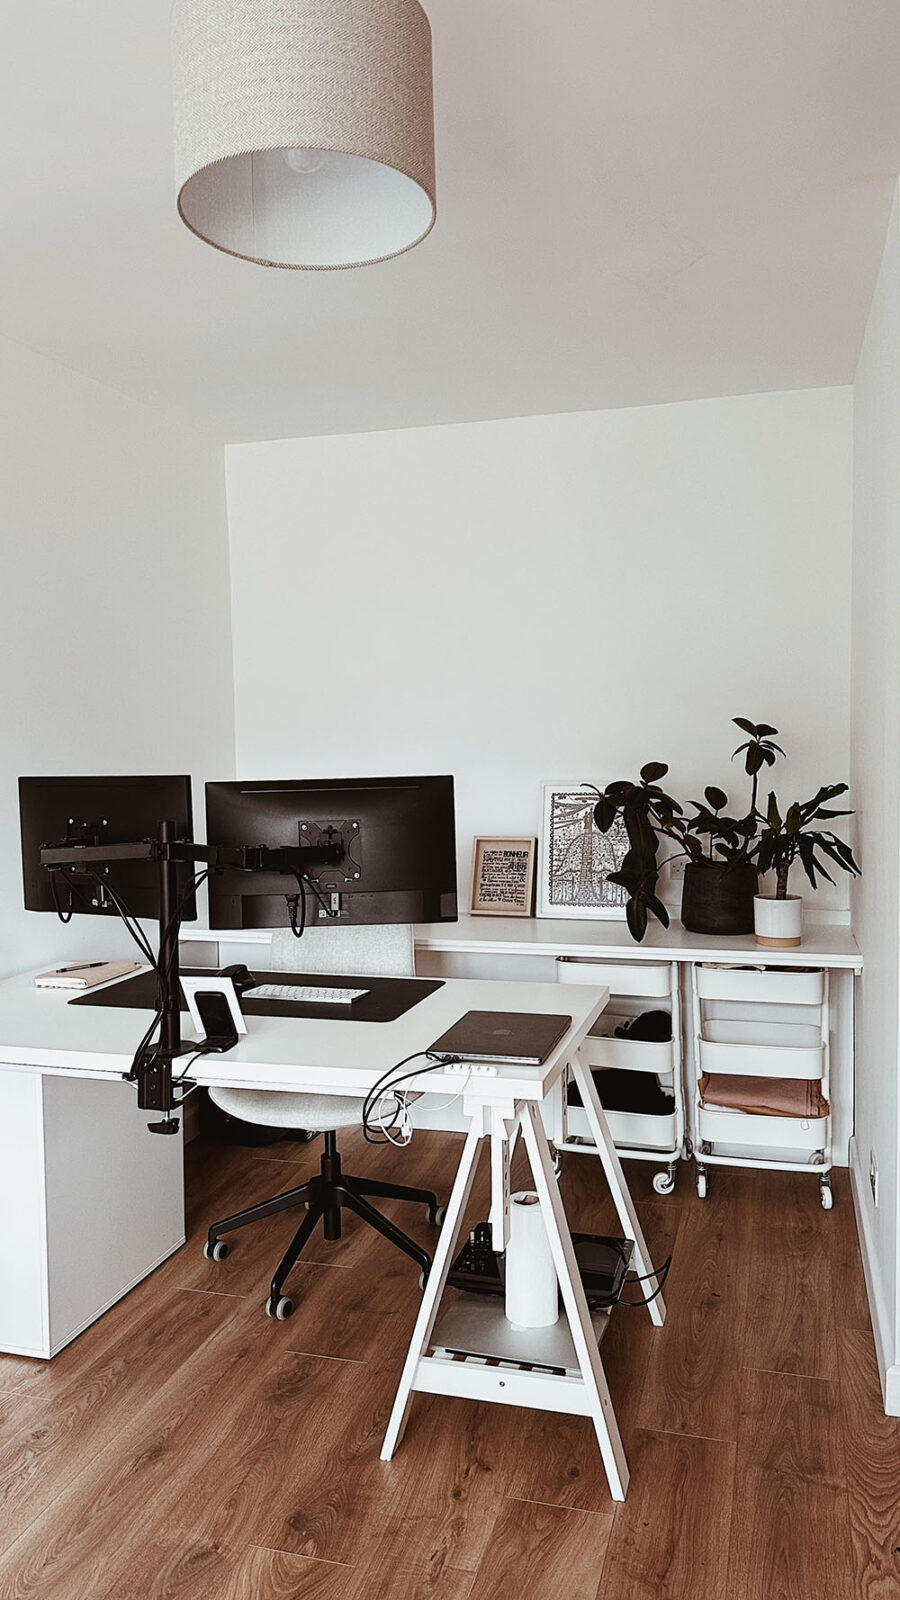 A home studio with wooden floors and white walls. An IKEA desk is positioned against the left wall, with a laptop and two monitors held up by metal arms. There are two trolleys underneath a backboard and some plants in the right hand corner.